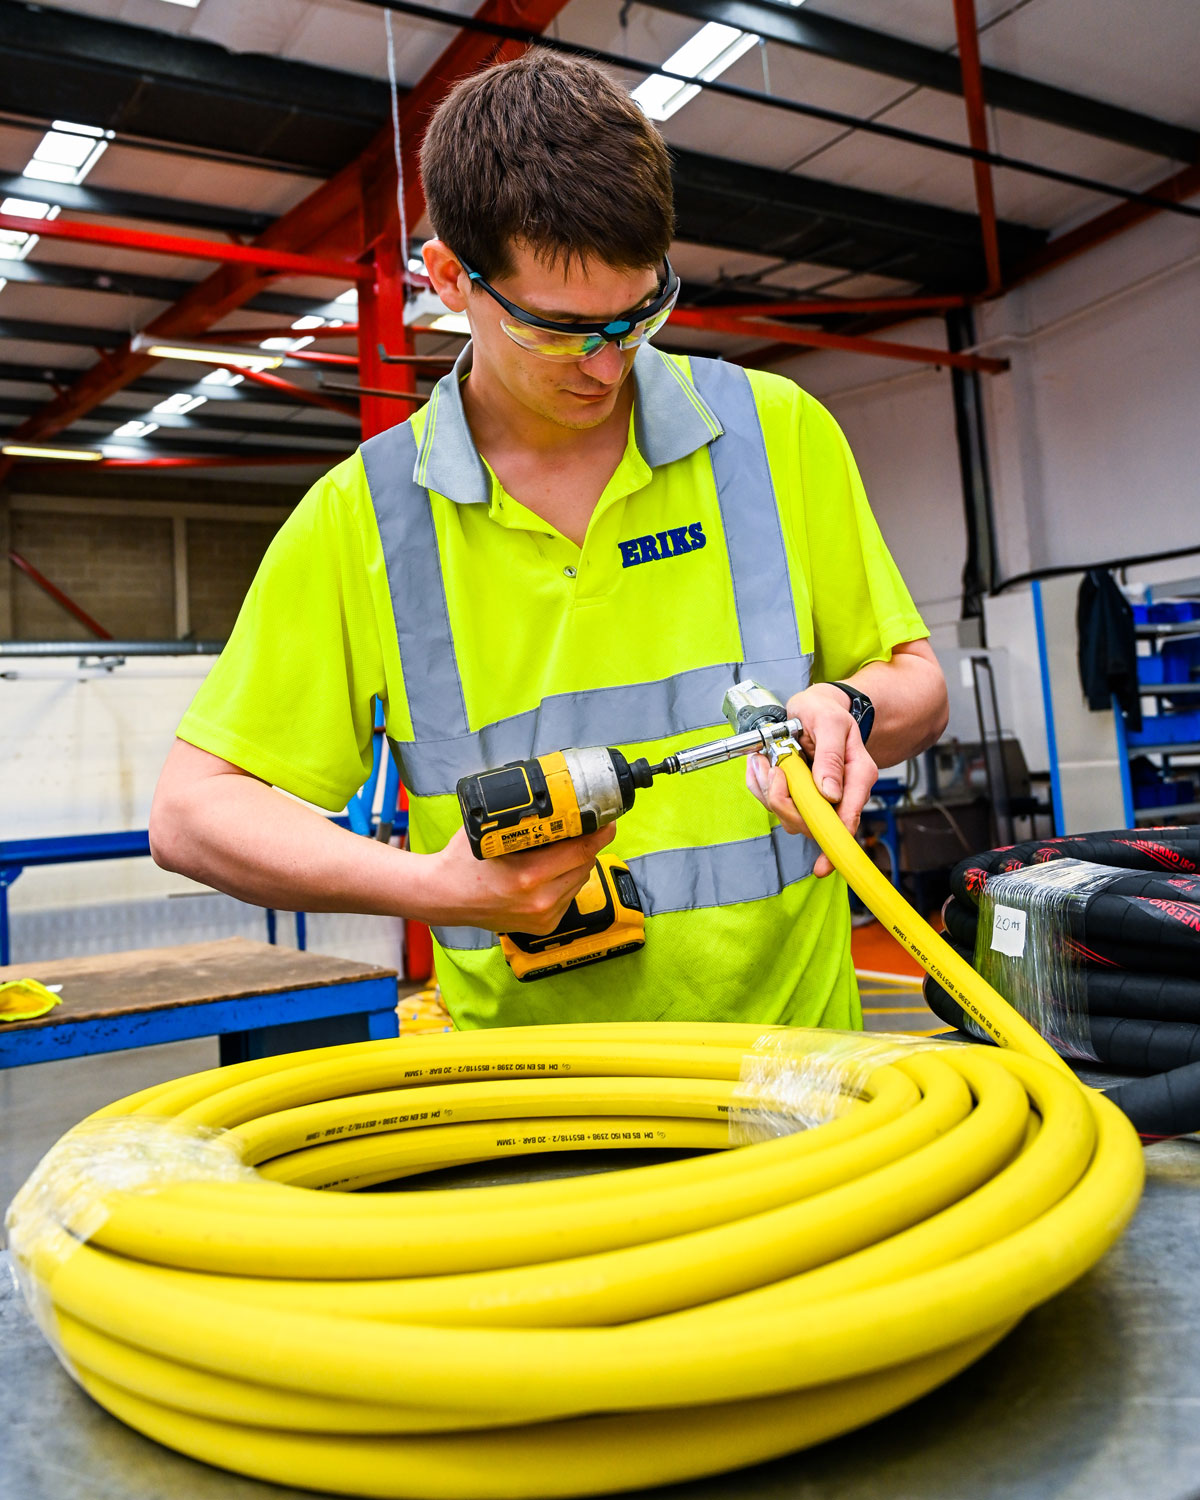 ERIKS employee working on a hose ending